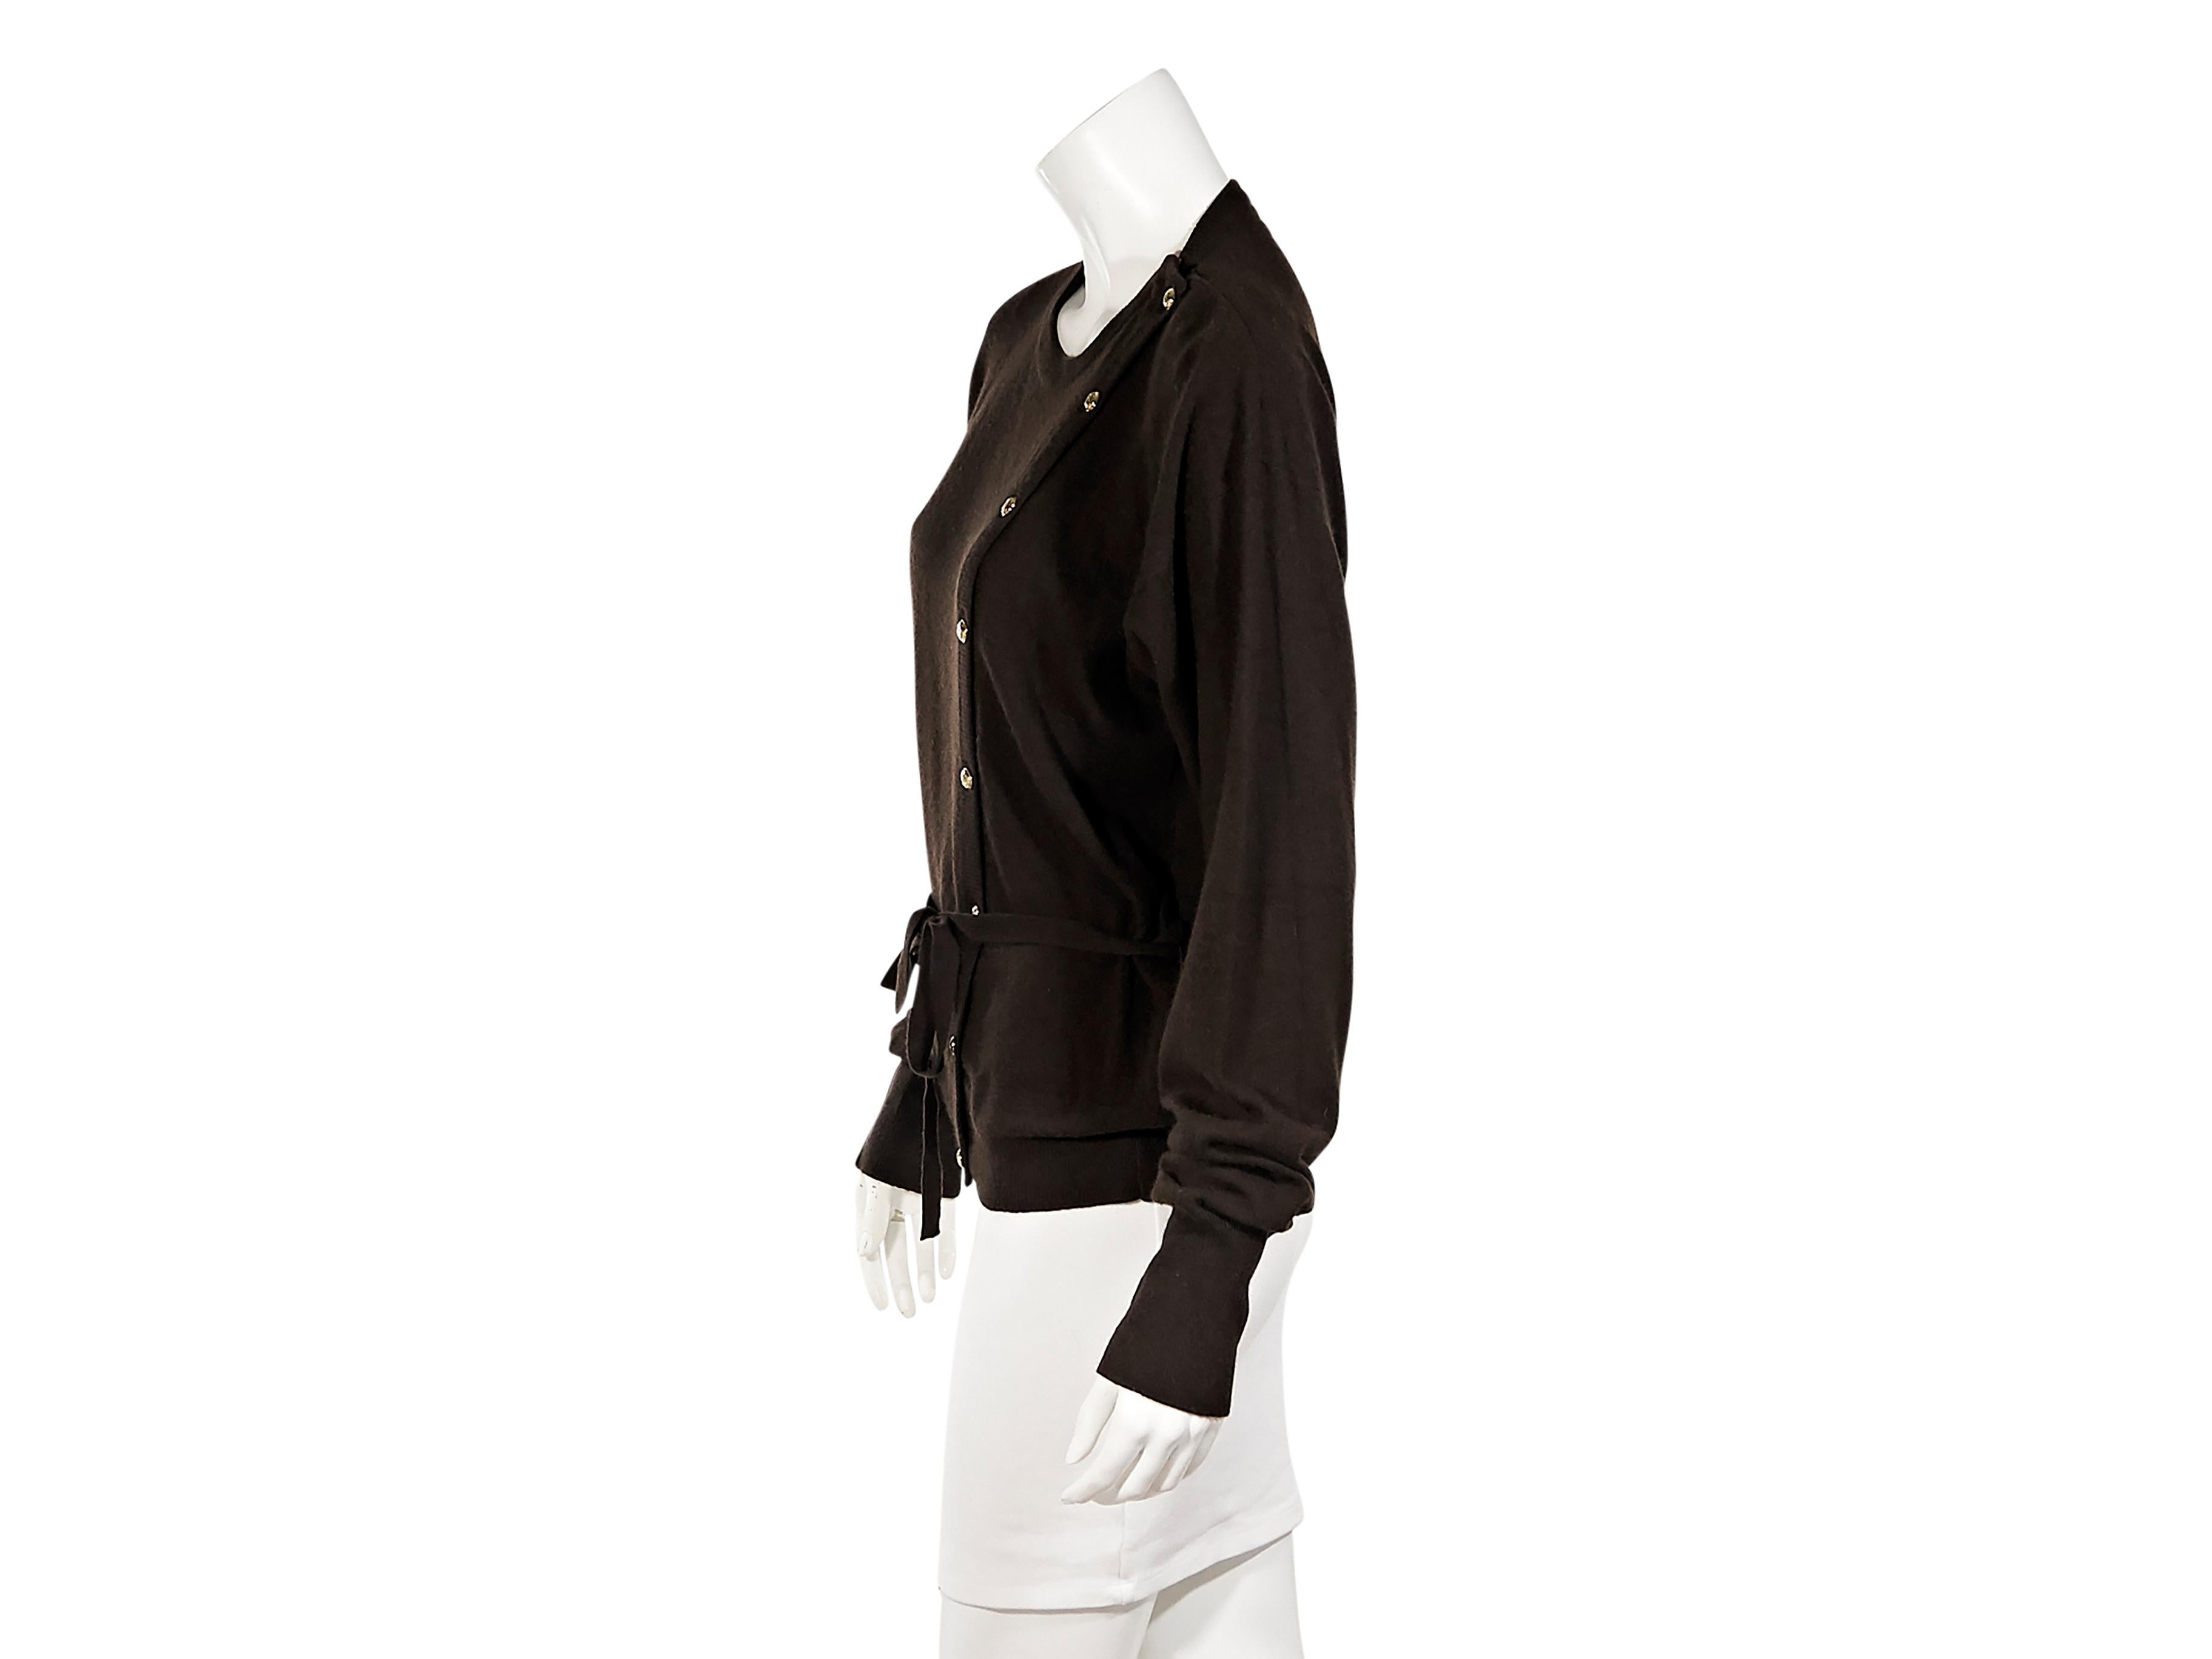 Product details:  Vintage brown cashmere sweater by Chanel.  Roundneck.  Long sleeves.  Asymmetrical button-front closure.  Self-tie belted waist.  Goldtone hardware.  36